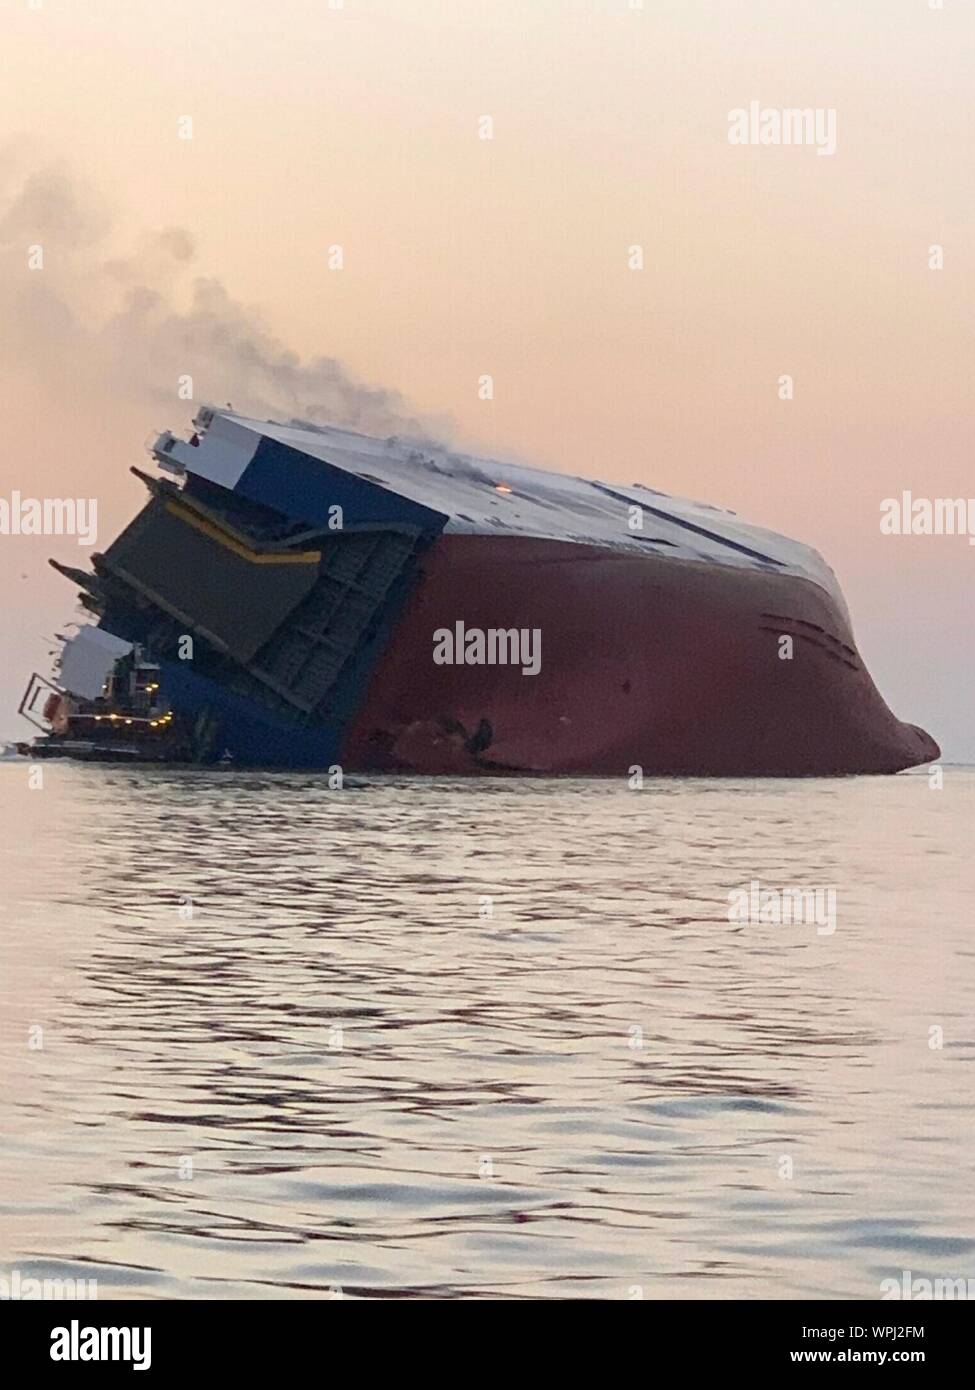 St Simons Island, Georgia, USA. 08 September, 2019. The M/V Golden Ray cargo ship rests inverted in the water after suffering a fire and capsizing in St Simons Sound Aerial September 8, 2019 off St Simons, Georgia, USA. The 656-foot-long vehicle carrier, listing heavily after suffering a fire with 24 crew members aboard.  Credit: U.S Coast Guard/Alamy Live News Stock Photo